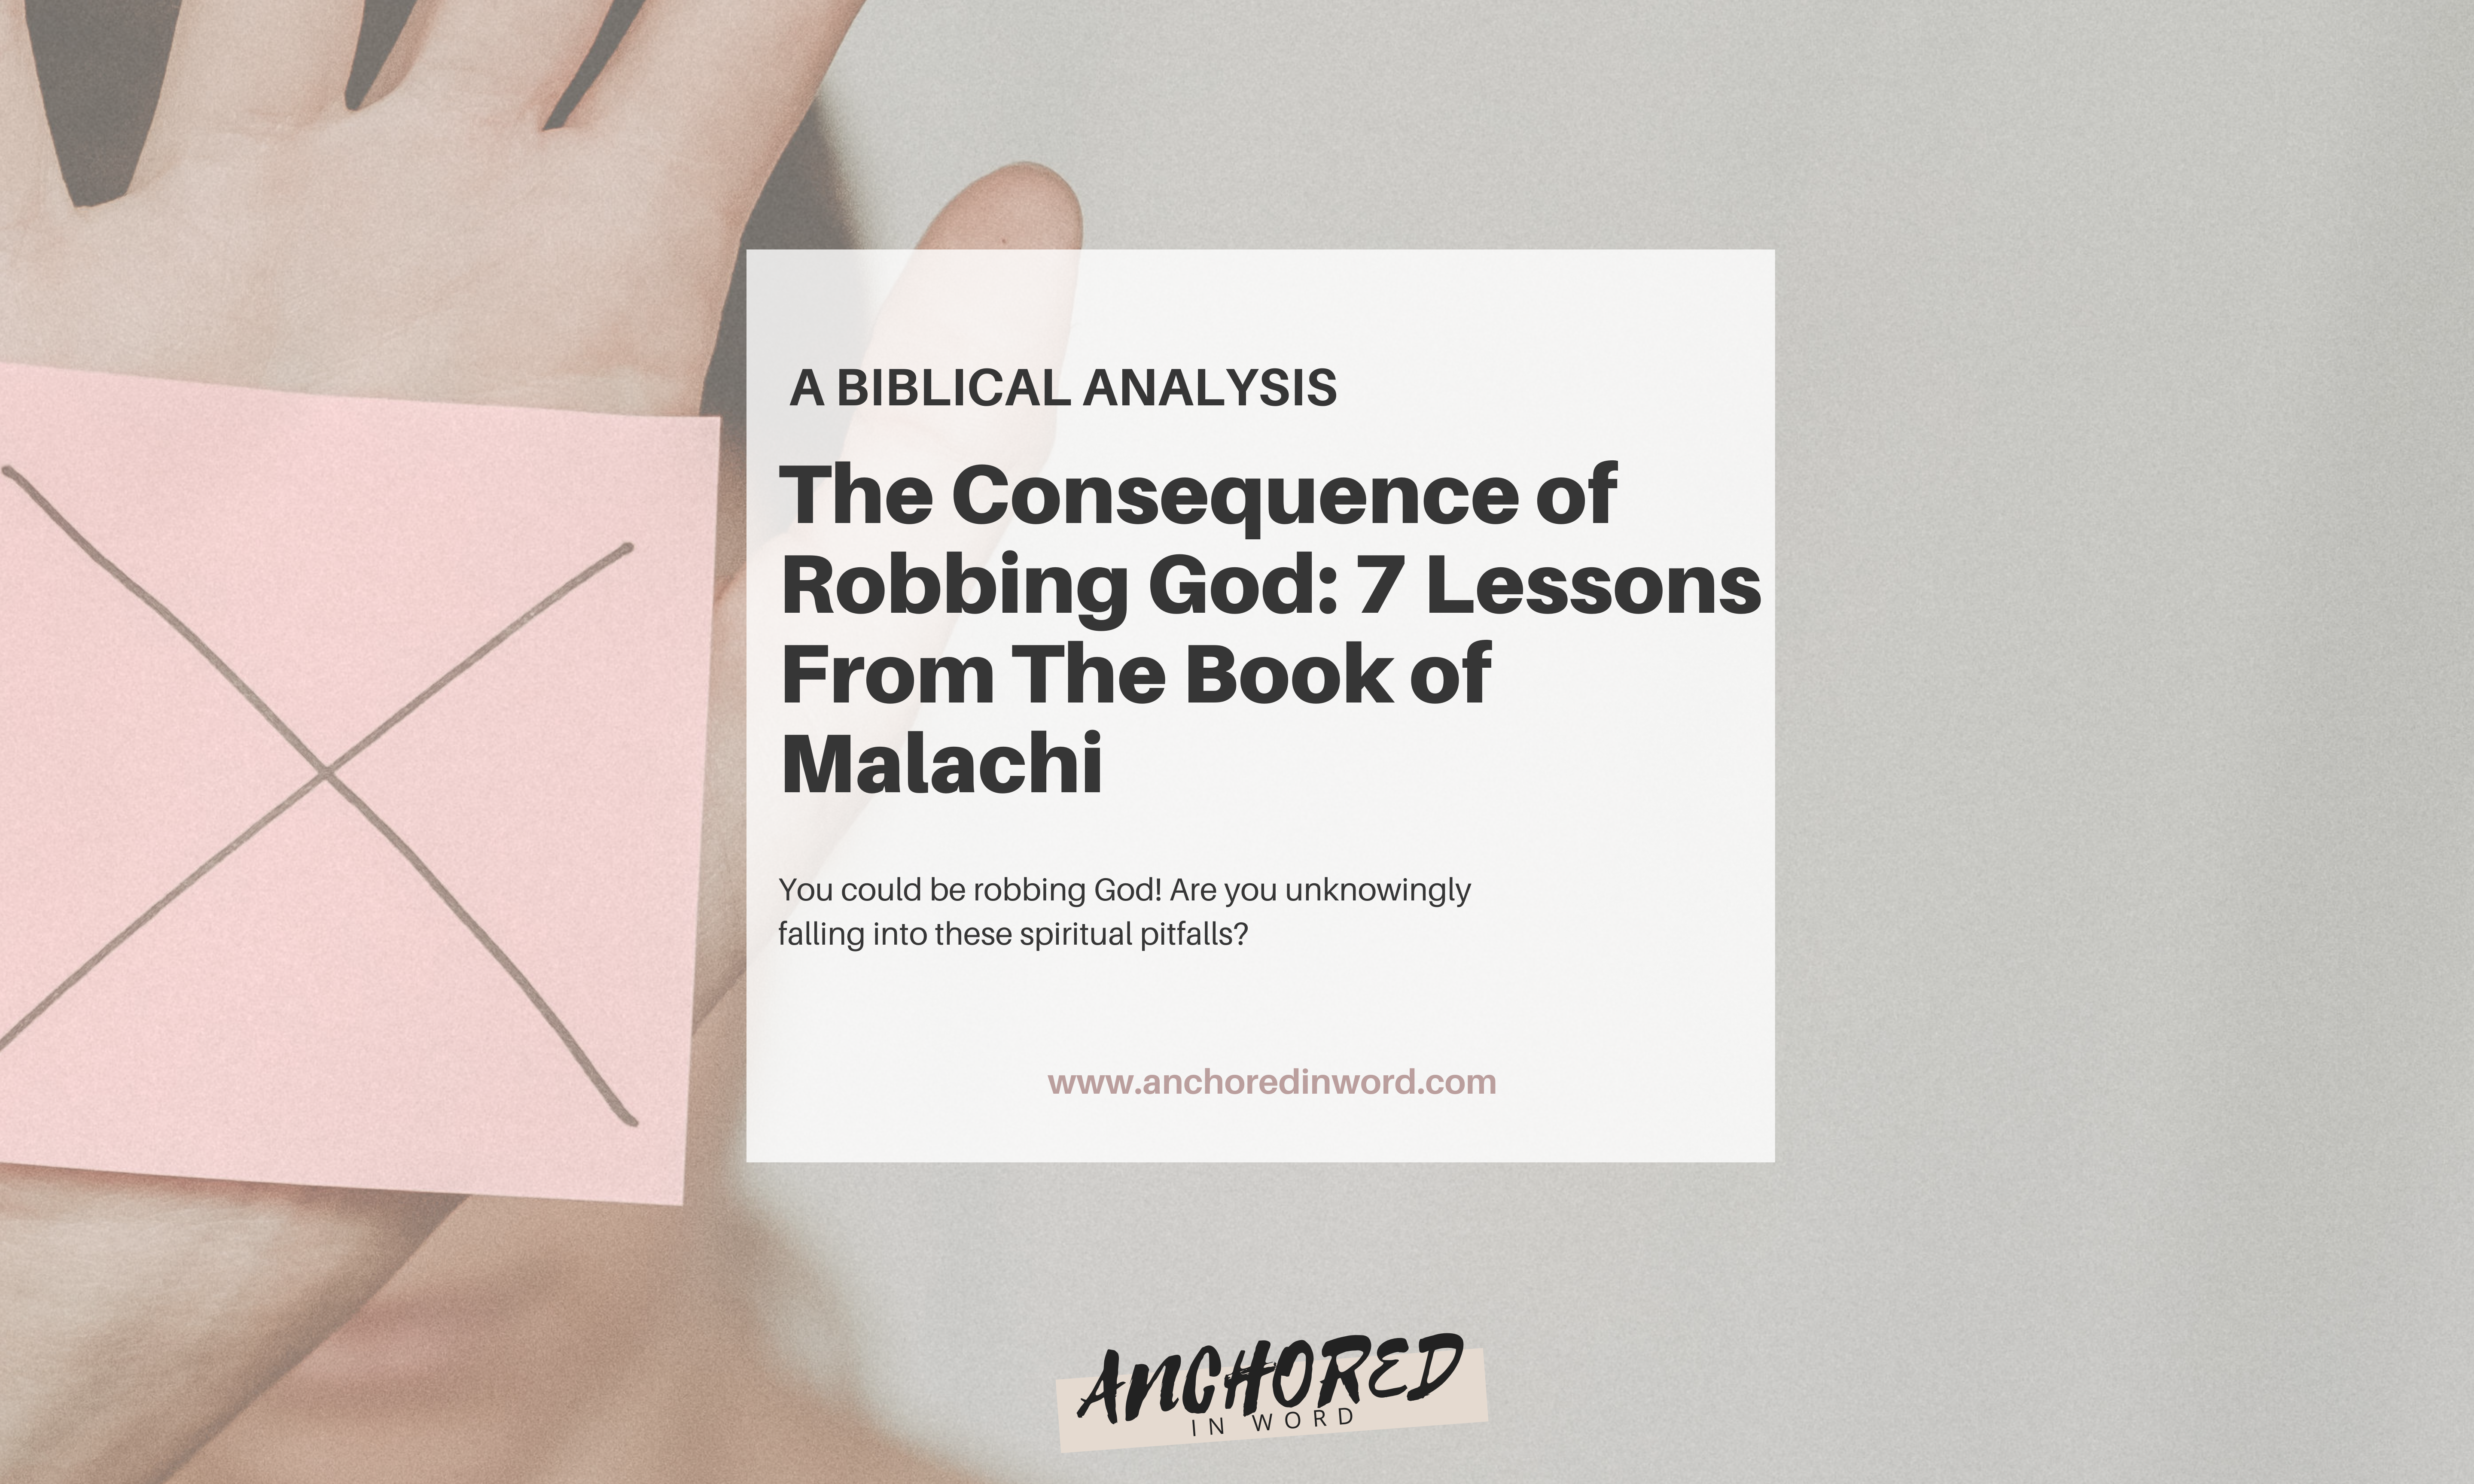 The Consequence of Robbing God: Lessons from the Book of Malachi